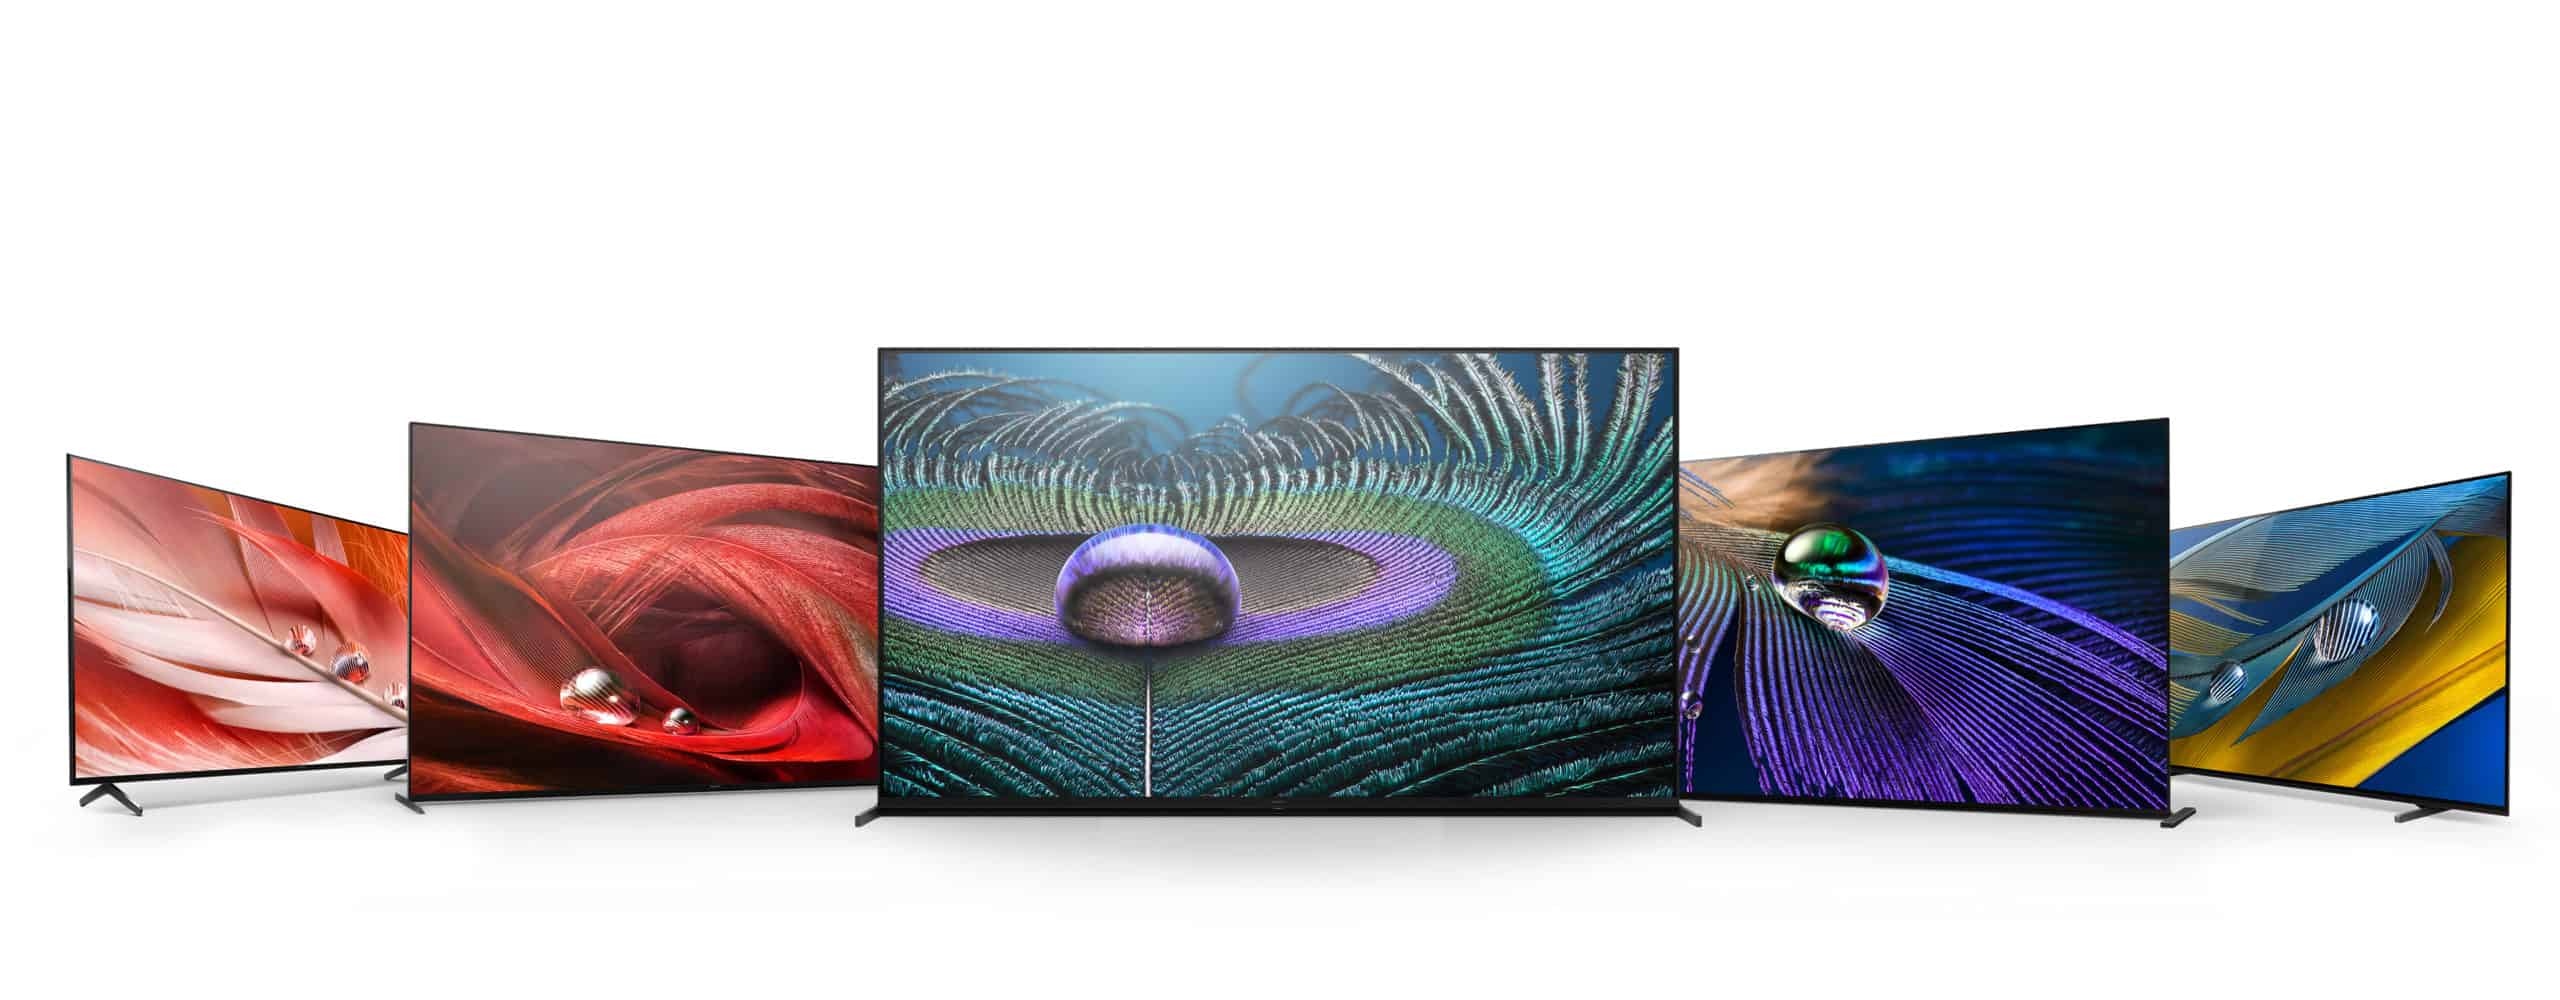 Sony Electronics Announces New BRAVIA XR 8K LED, 4K OLED and 4K LED Models with New “Cognitive Processor XR”